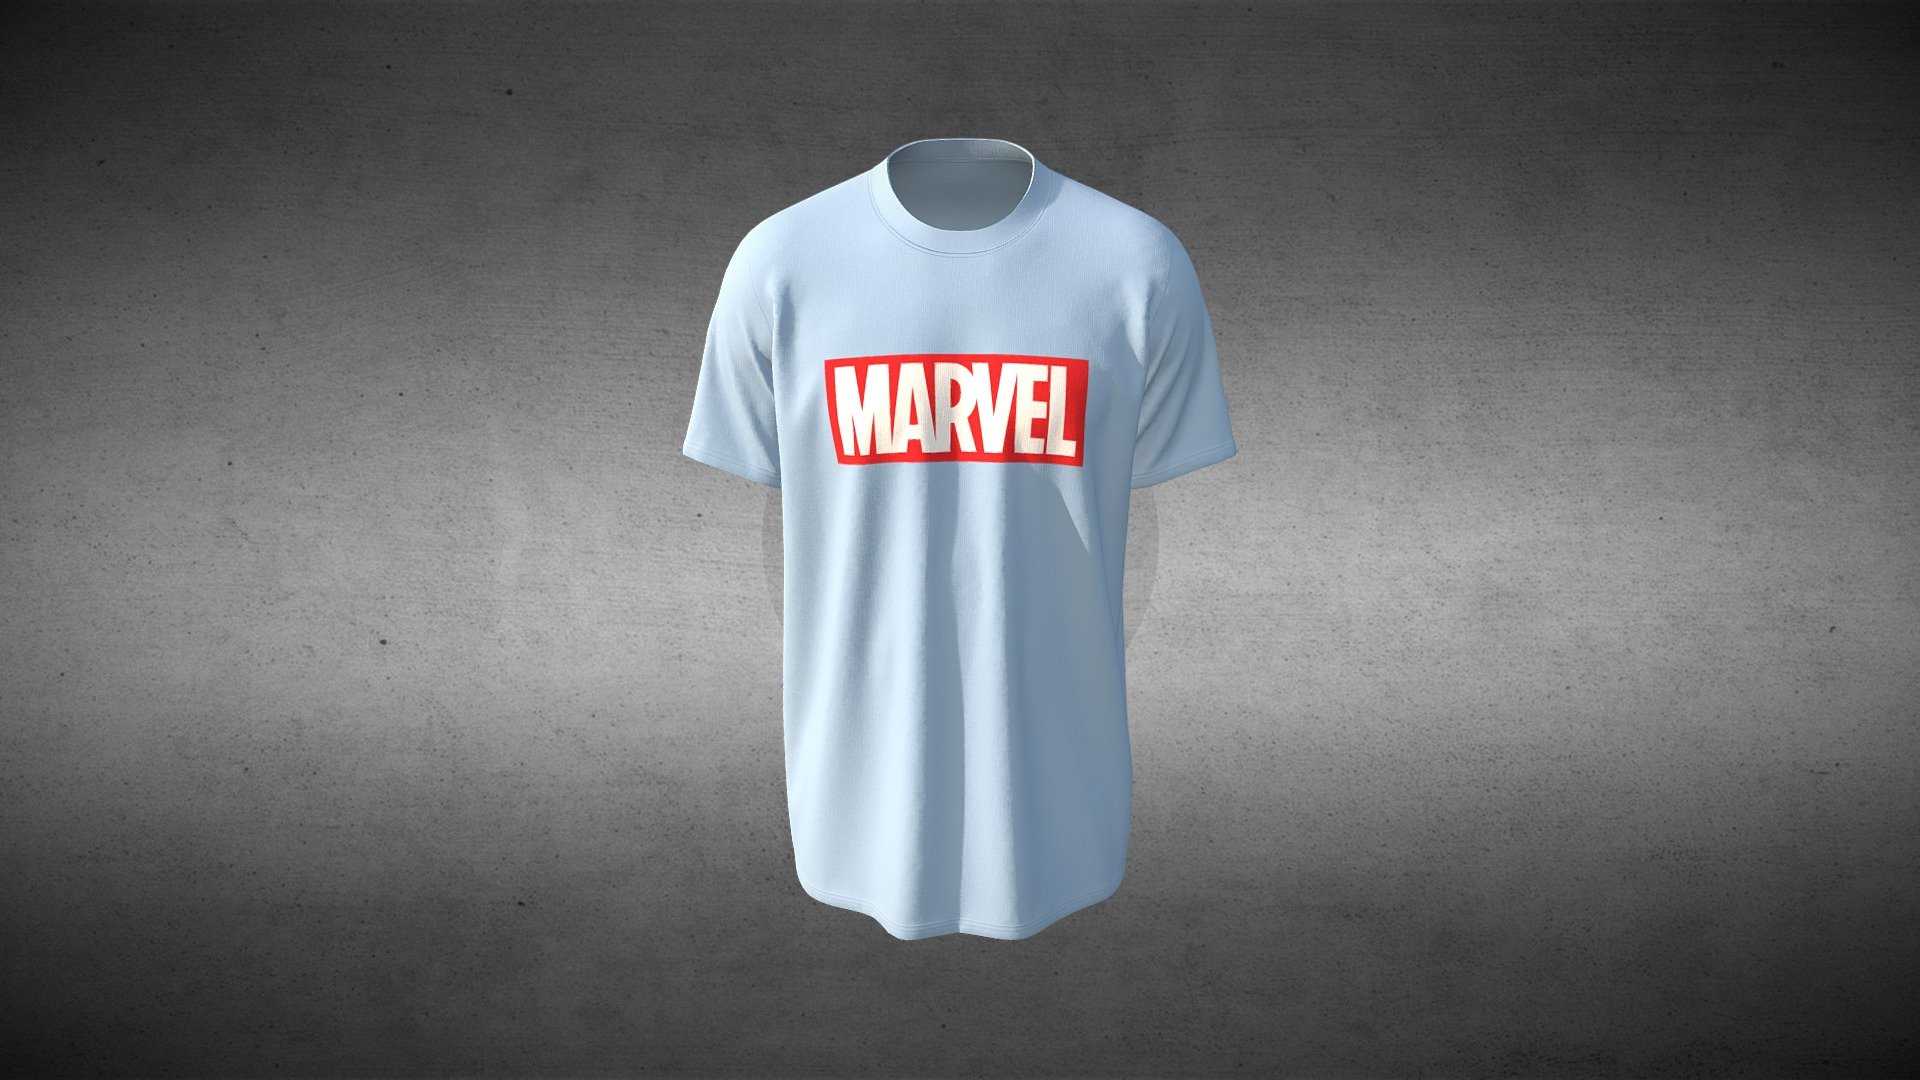 Cloth Title = Loose Fit Marvel Print Tee Design 

SKU = DG100038 

Category = Unisex 

Product Type = Tee 

Cloth Length = Regular 

Body Fit = Relaxed Fit 

Occasion = Casual  

Sleeve Style = Set In Sleeve  


Our Services:

3D Apparel Design.

OBJ,FBX,GLTF Making with High/Low Poly.

Fabric Digitalization.

Mockup making.

3D Teck Pack.

Pattern Making.

2D Illustration

Cloth Animation and 360 Spin Video


Contact us:- 

Email: info@digitalfashionwear.com 

Website: https://digitalfashionwear.com 

WhatsApp No: +8801759350445 


We designed all the types of cloth specially focused on product visualization, e-commerce, fitting, and production. 

We will design: 

T-shirts 

Polo shirts 

Hoodies 

Sweatshirt 

Jackets 

Shirts 

TankTops 

Trousers 

Bras 

Underwear 

Blazer 

Aprons 

Leggings 

and All Fashion items. 





Our goal is to make sure what we provide you, meets your demand 3d model